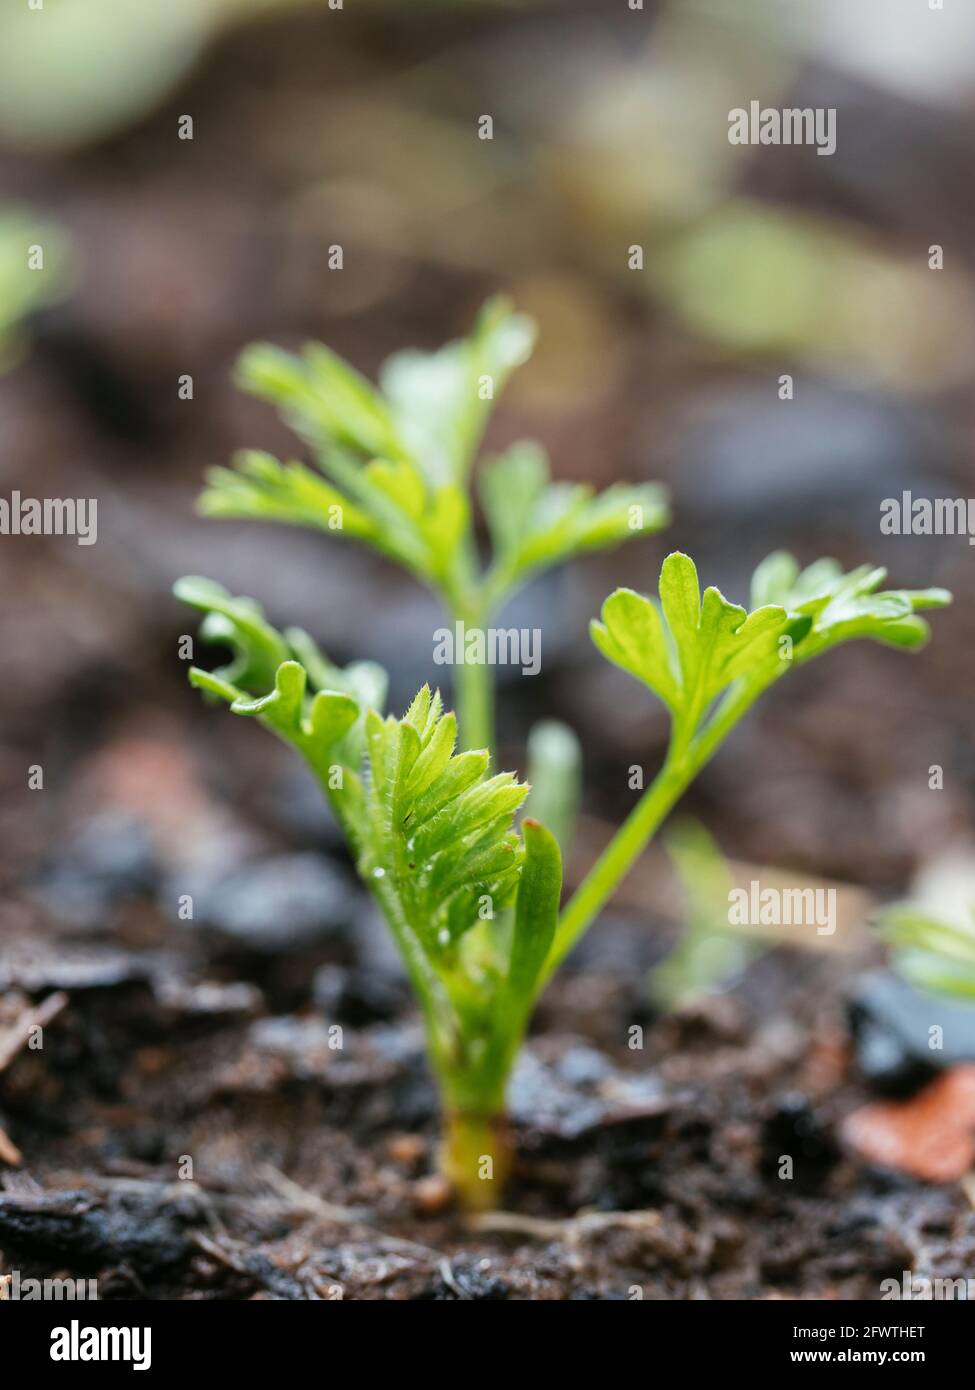 Young carrot seedling growing in a vegetable garden. Stock Photo